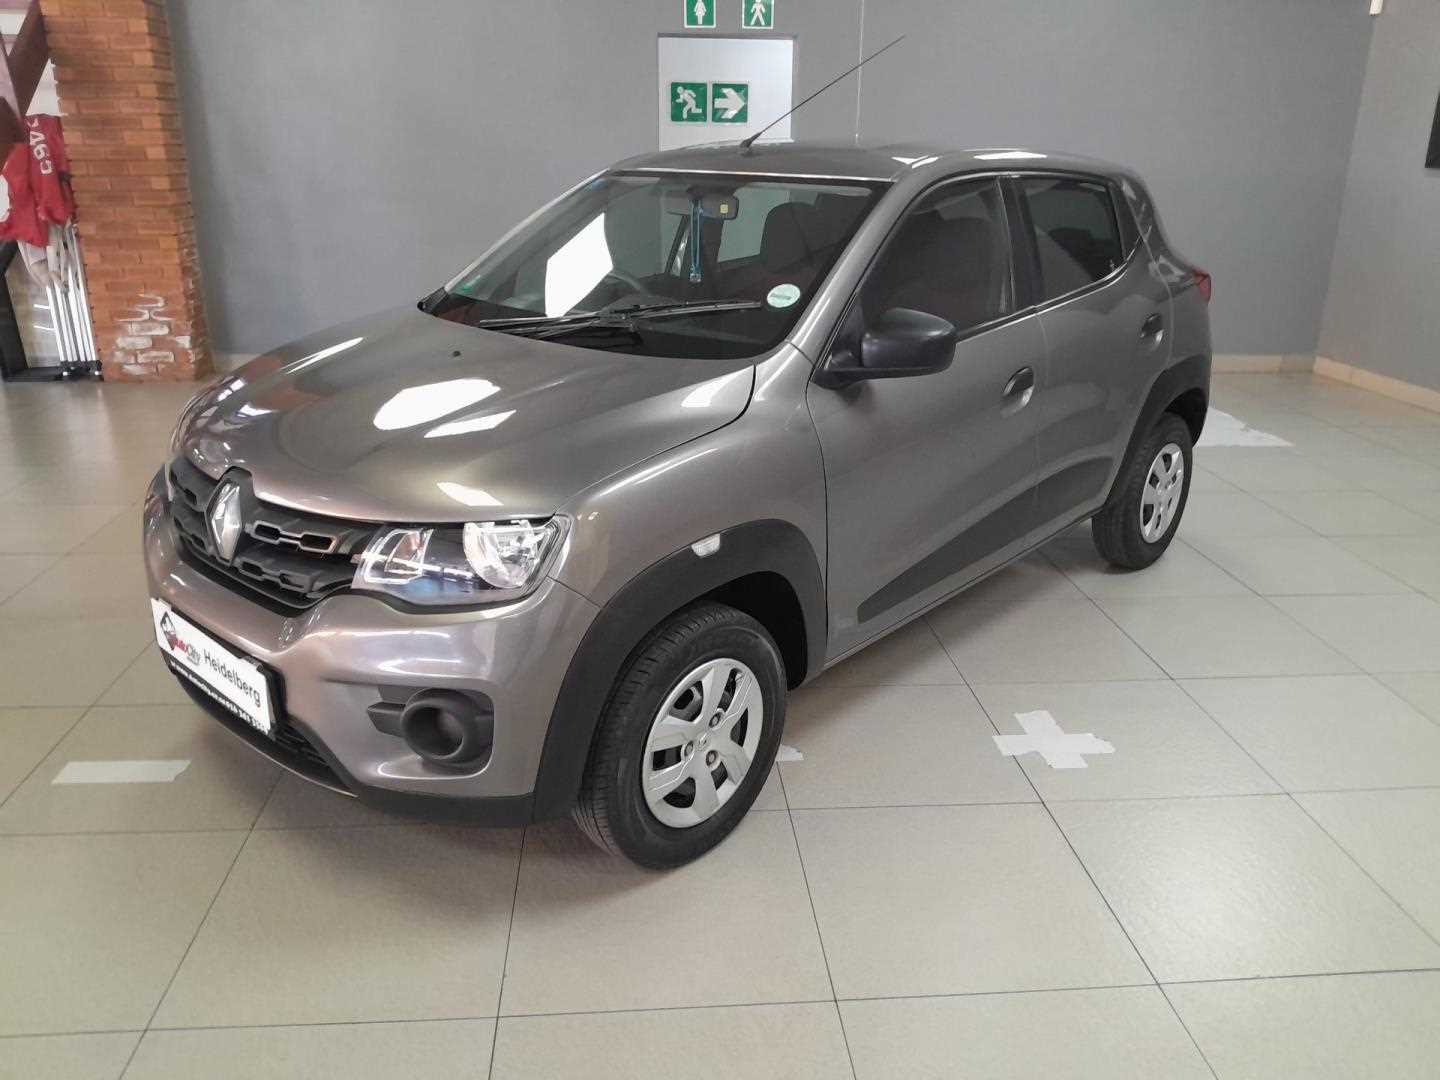 Renault KWID 1.0 EXPRESSION 5DR for Sale in South Africa